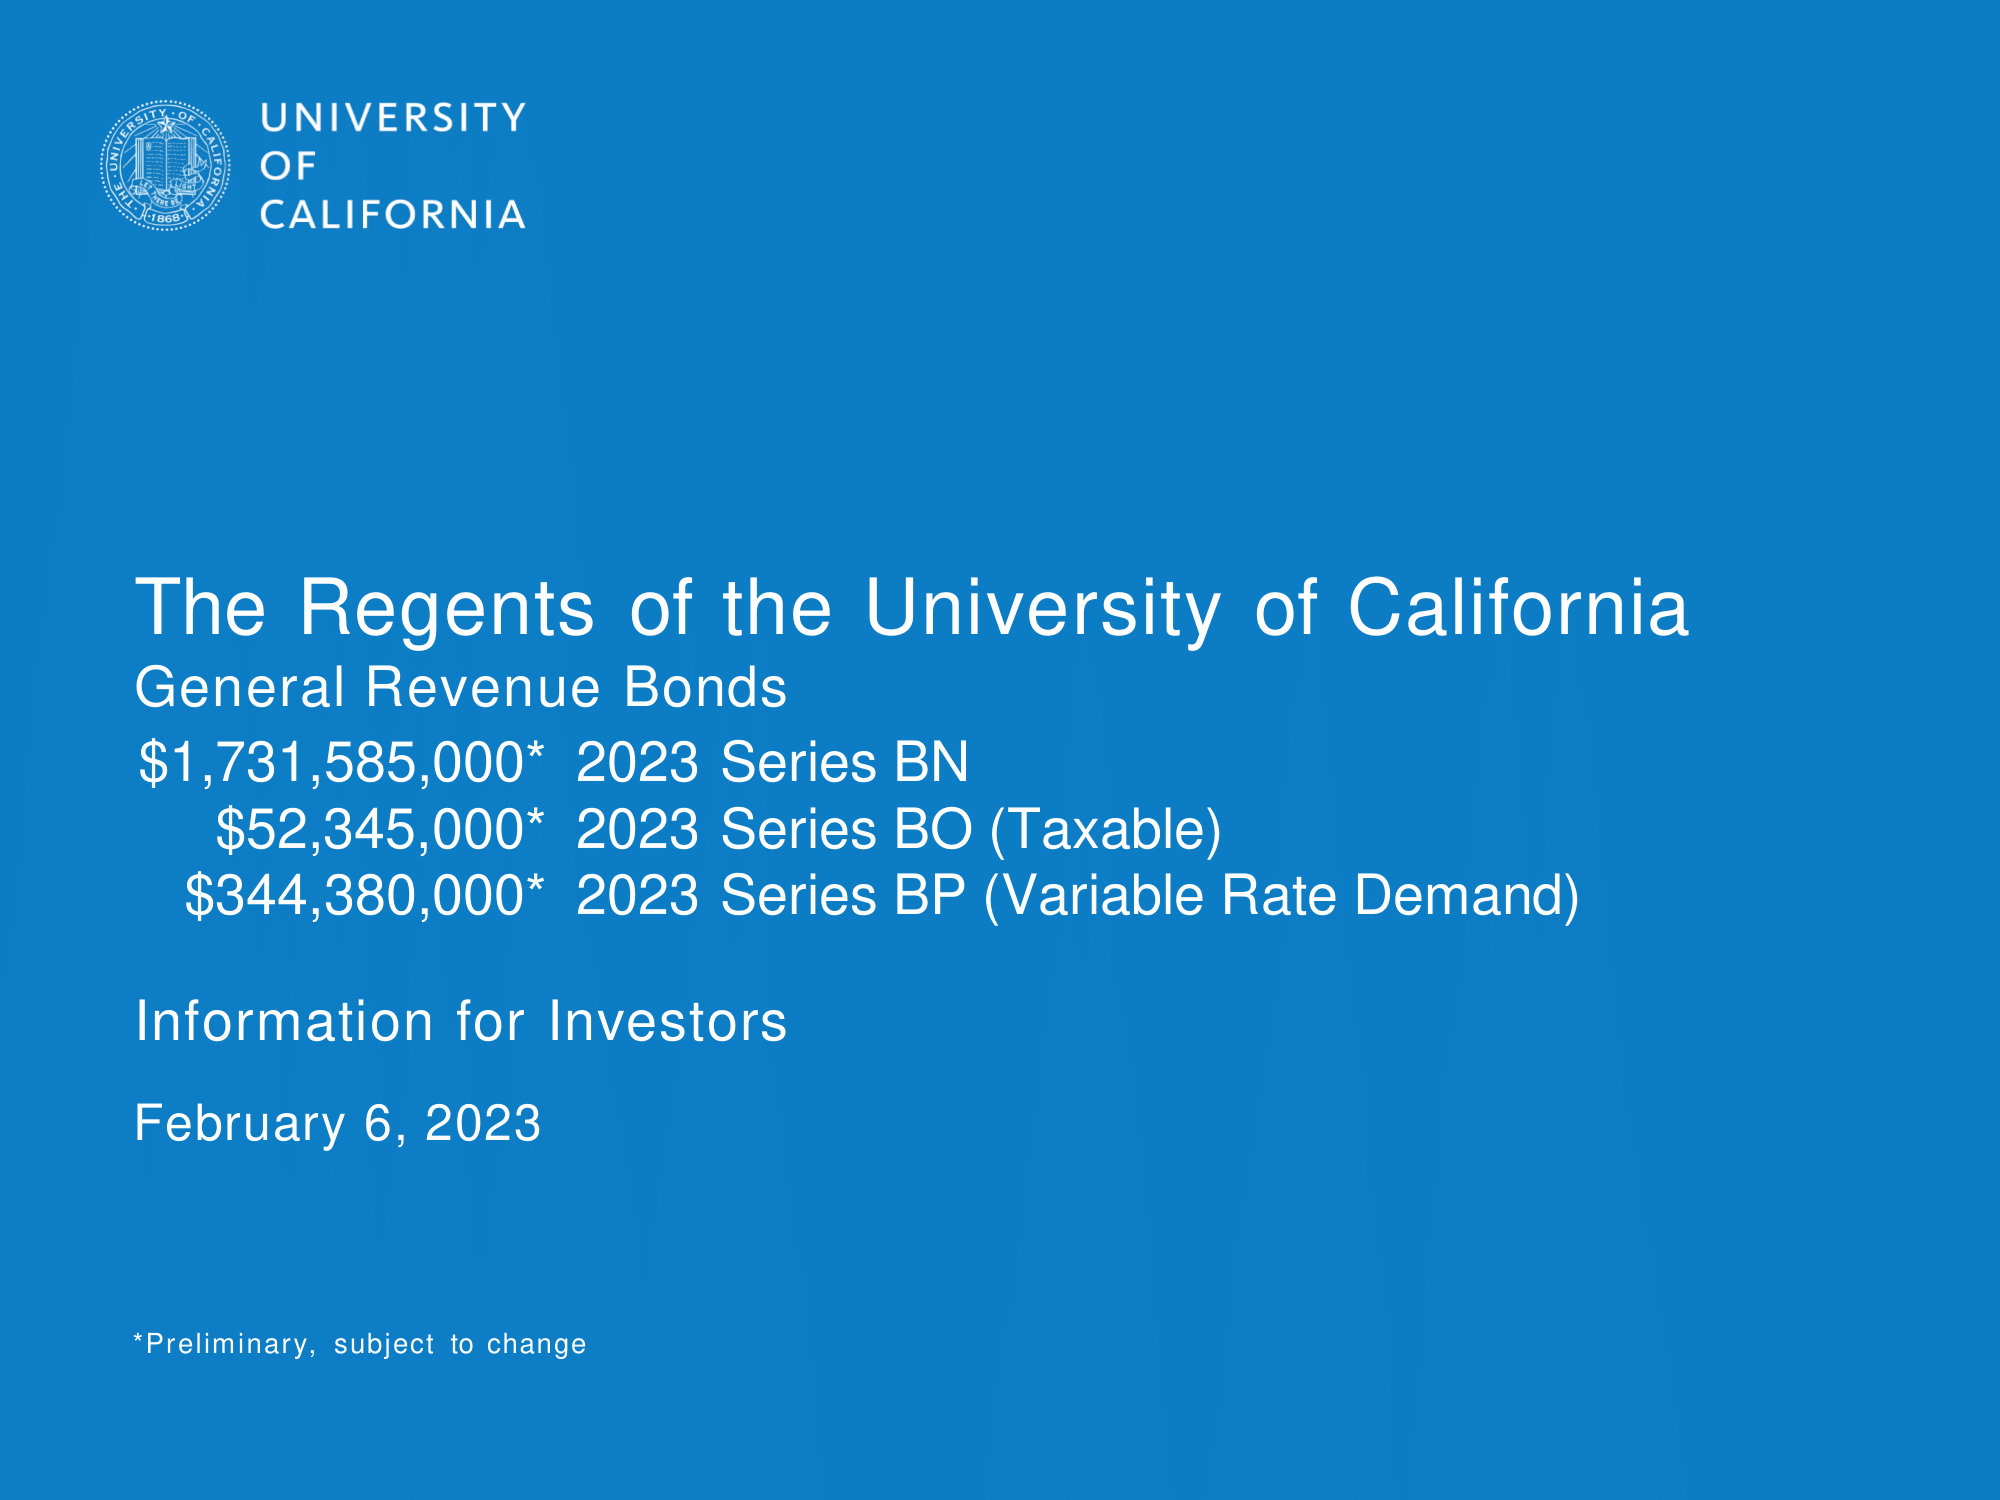 The Regents of the University of California, General Revenue Bonds 2023 Series BN, 2023 Series BO (Taxable), and 2023 Series BP (Variable Rate Demand) Information for Investors